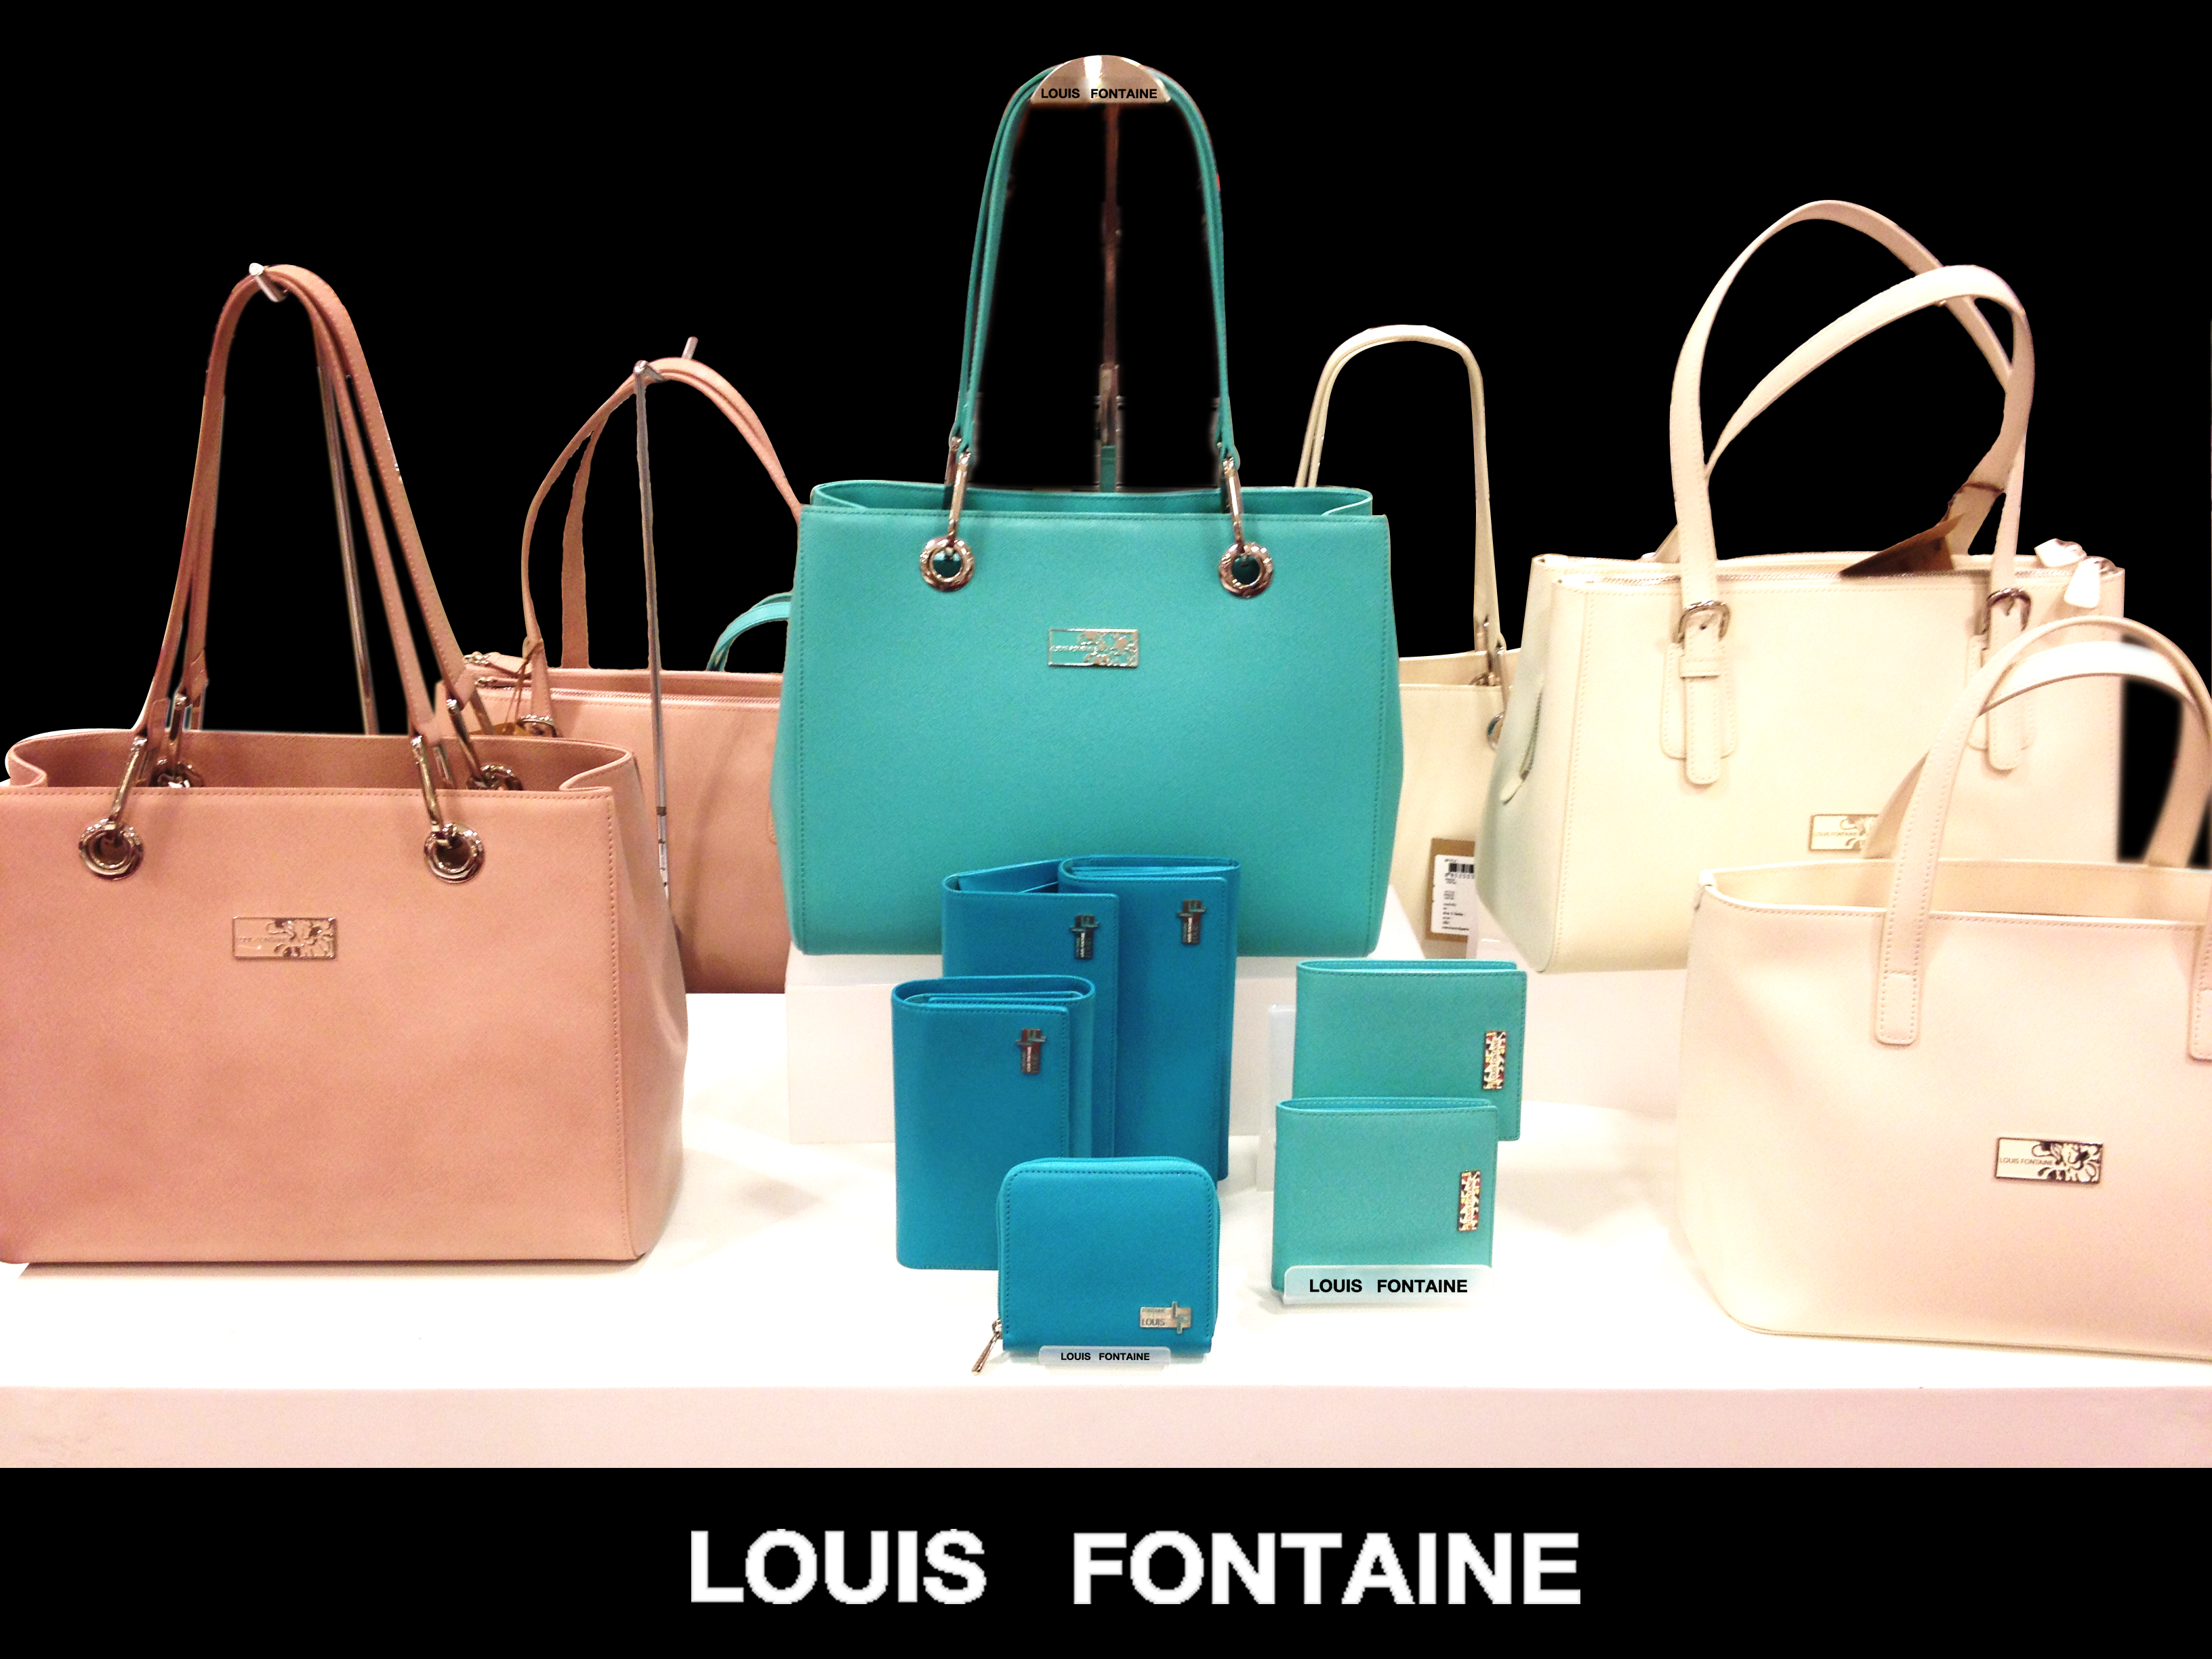 LOUIS FONTAINE: CONNER AT THE MALL BANGKAE – Louis Fontaine Leather Goods